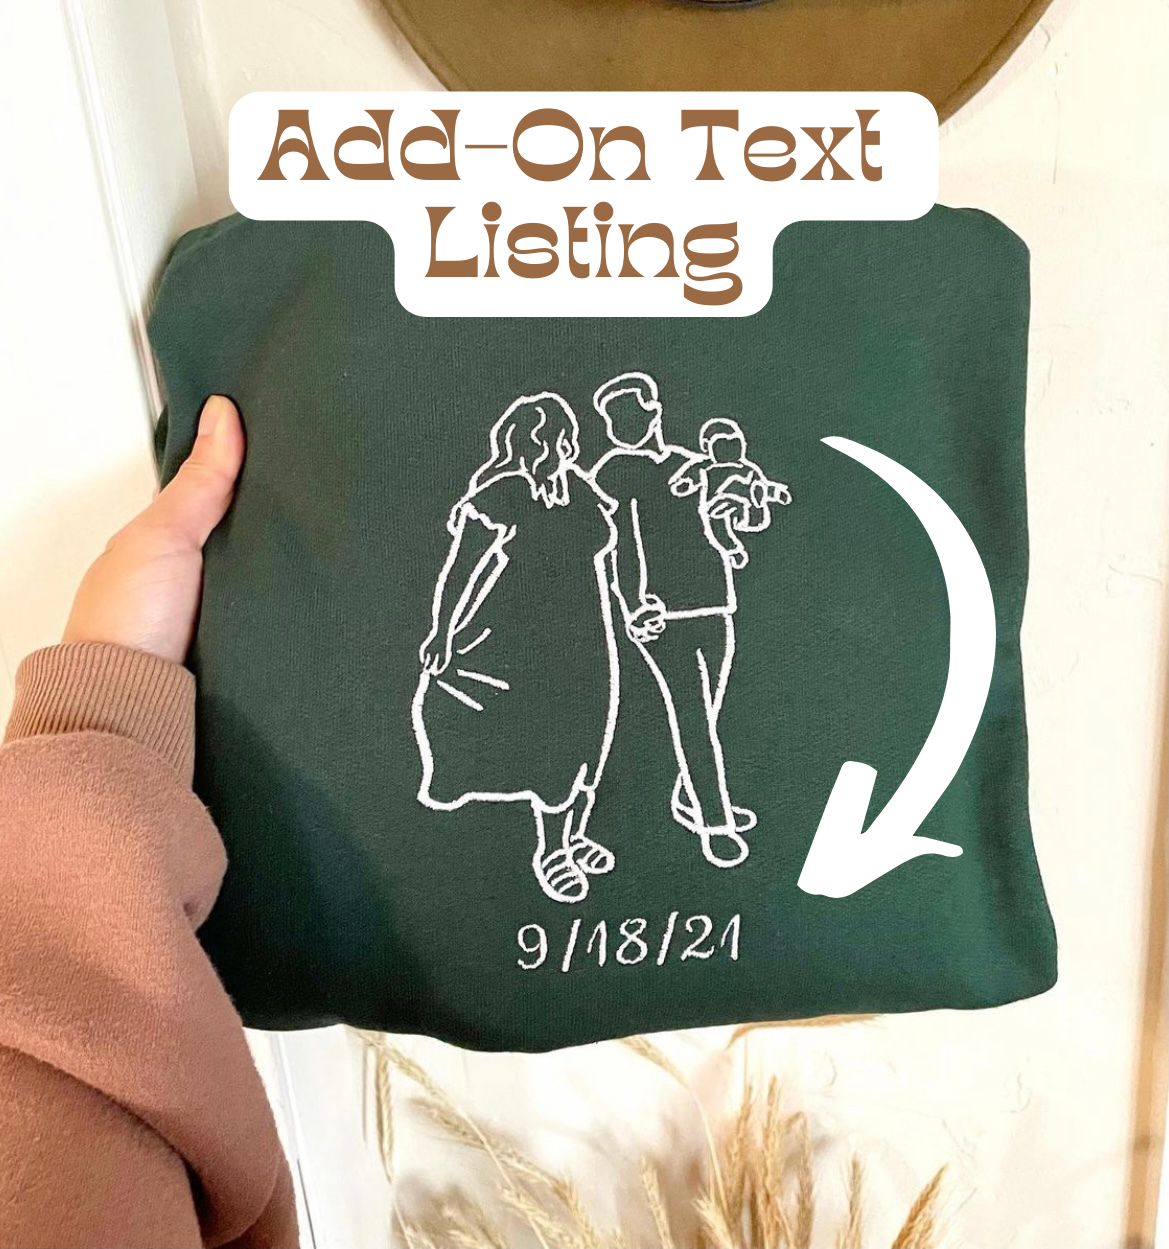 Add-On Text (Sleeve or Bottom of outline)